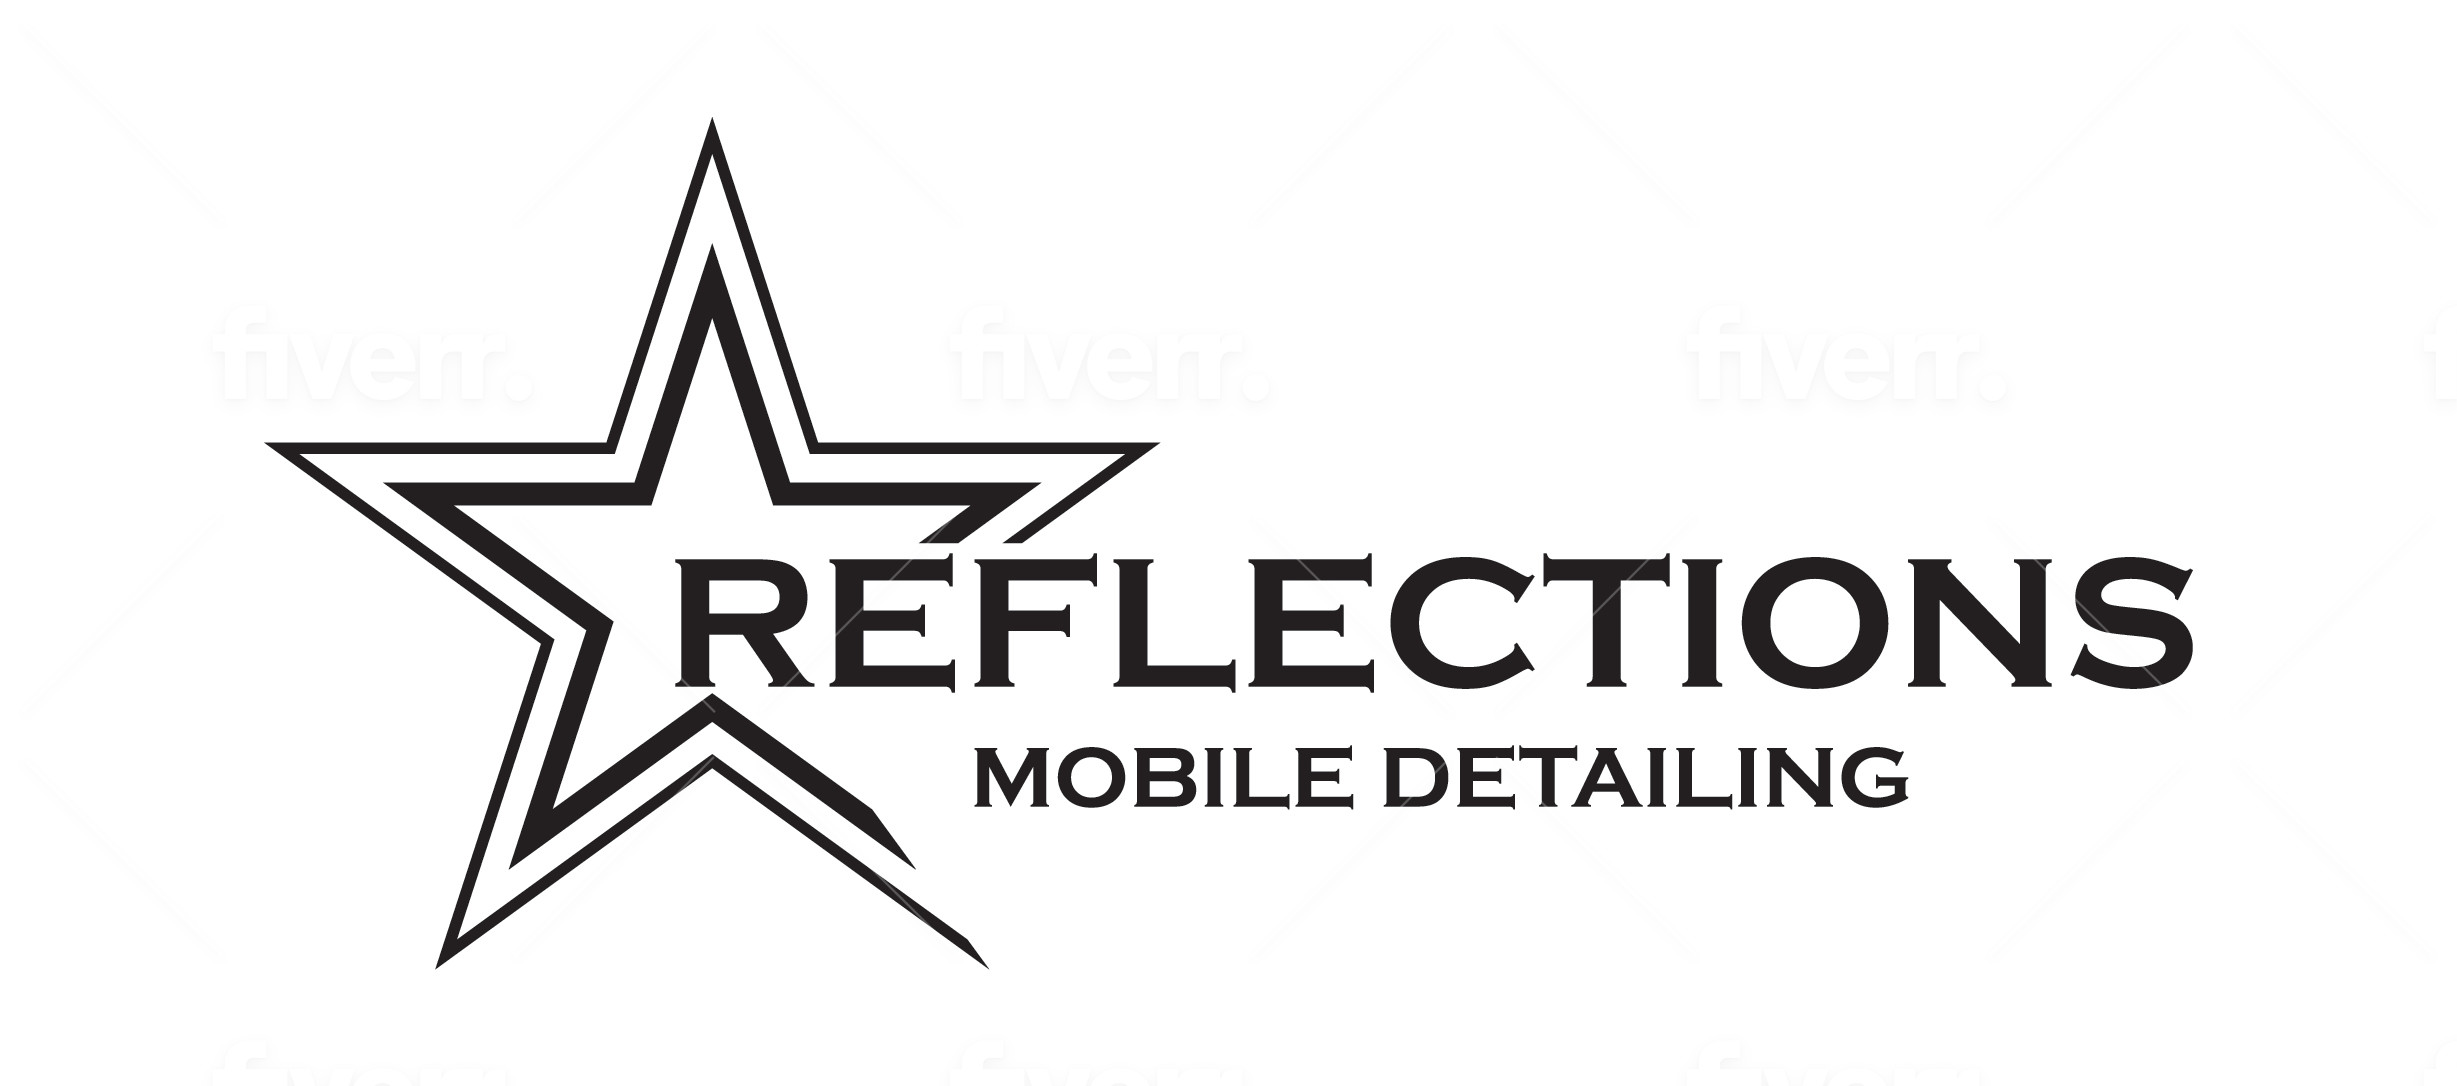 Reflections Mobile Detailing | 4734 Benbrook Blvd, Fort Worth, TX 76116 | Phone: (682) 916-3992